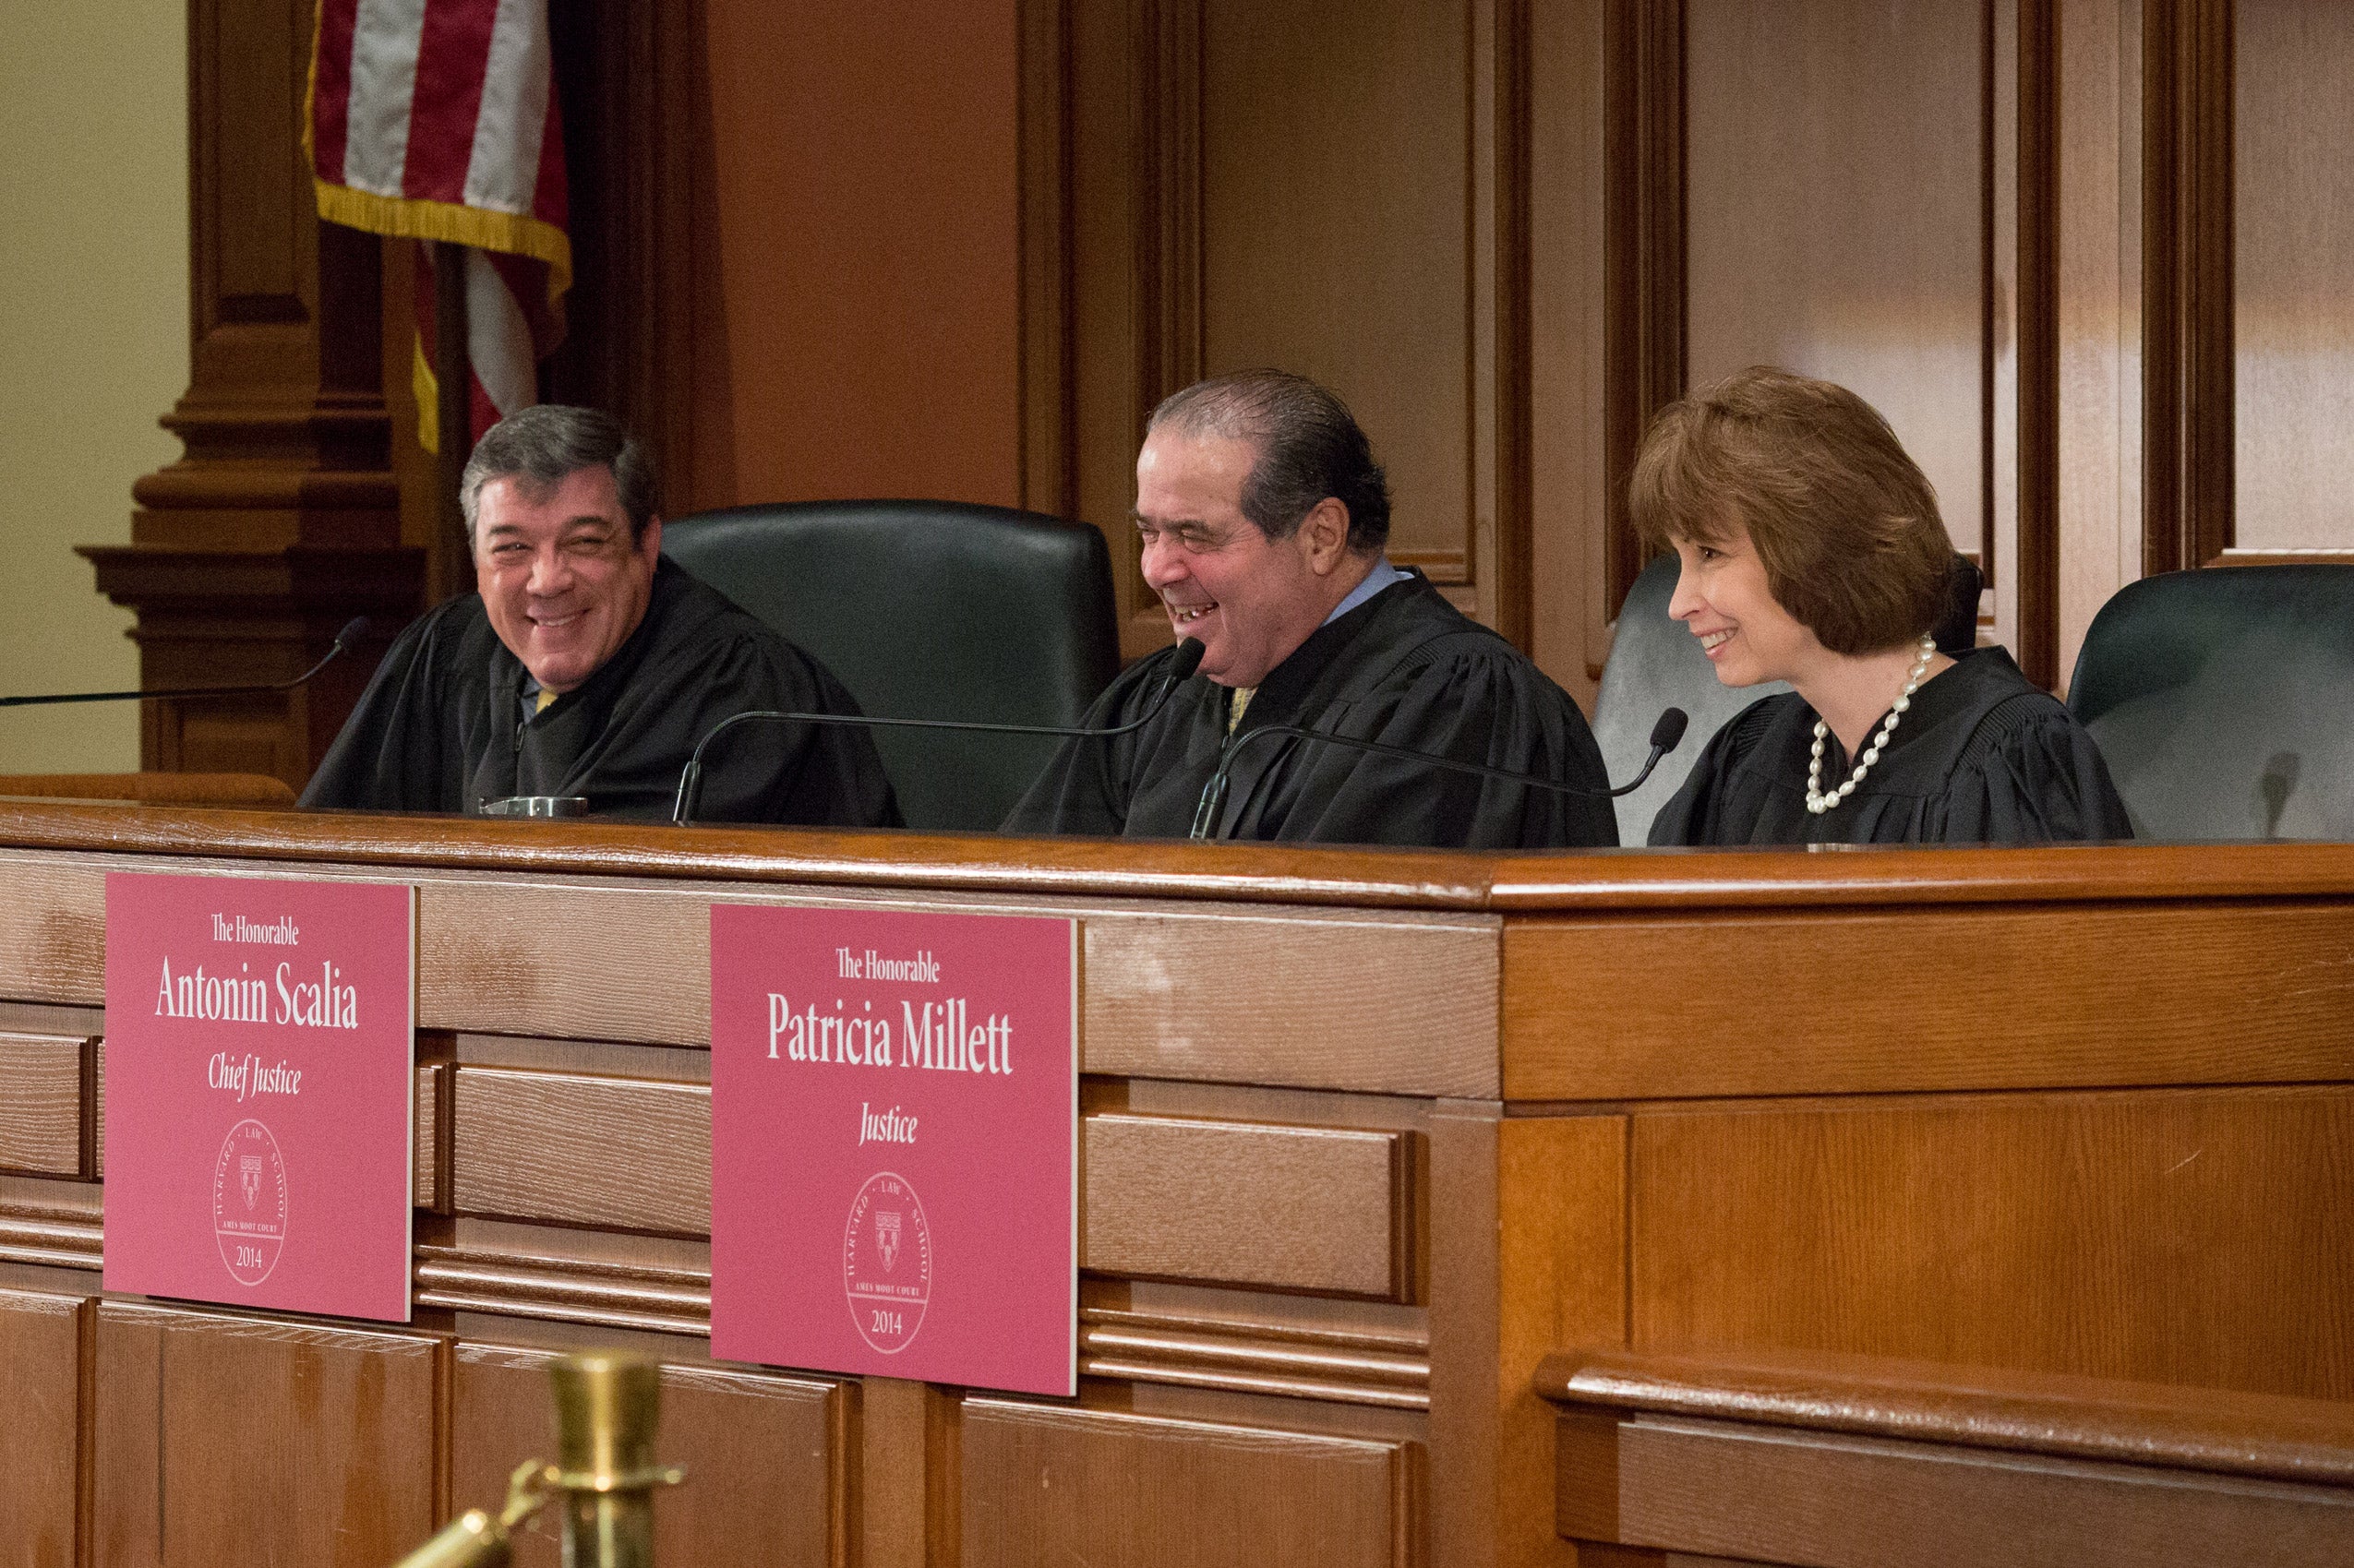 Three justices smiling behind the bench